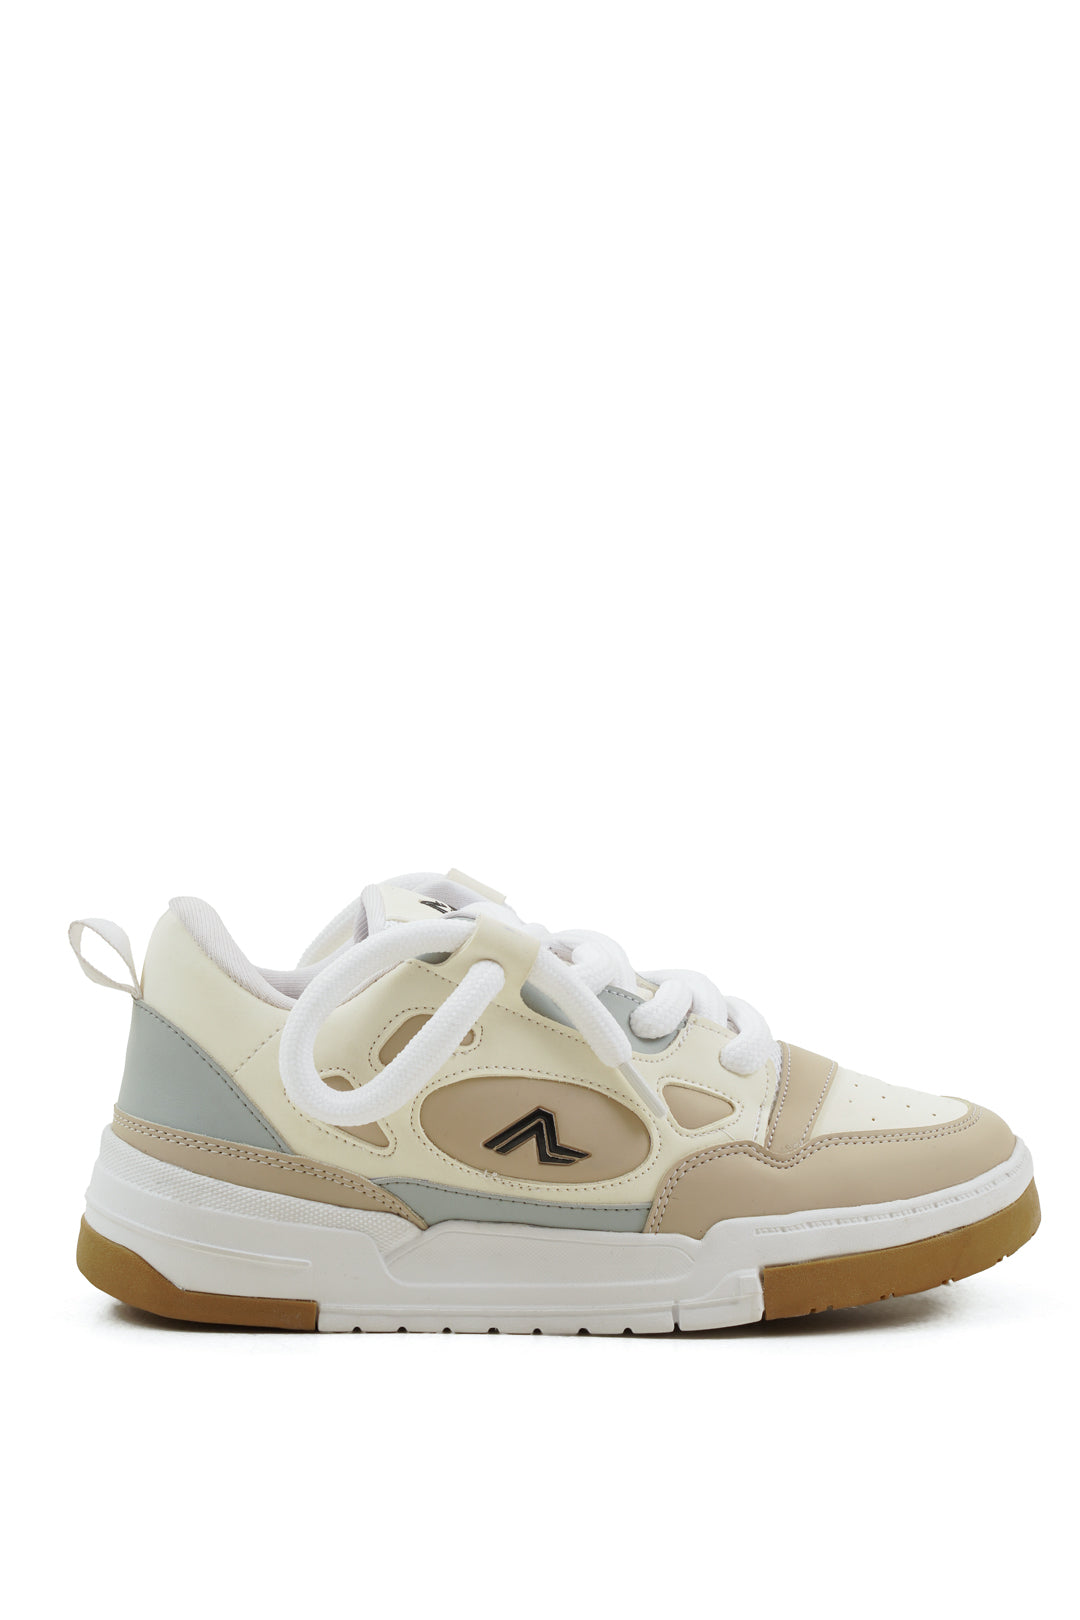 OGY Cream Grey Low Top Trainer